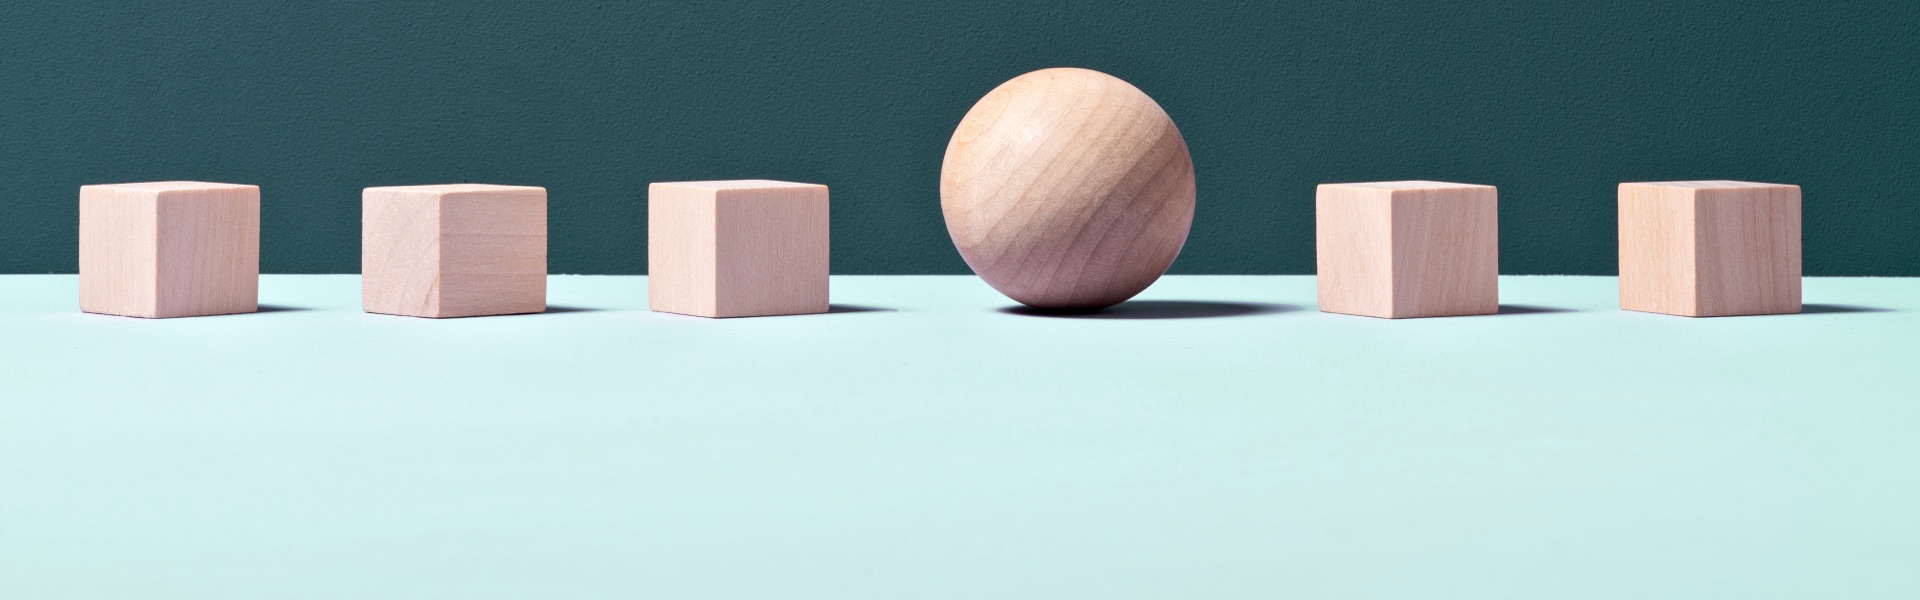 A wooden sphere sits between 3 wooden cubes.